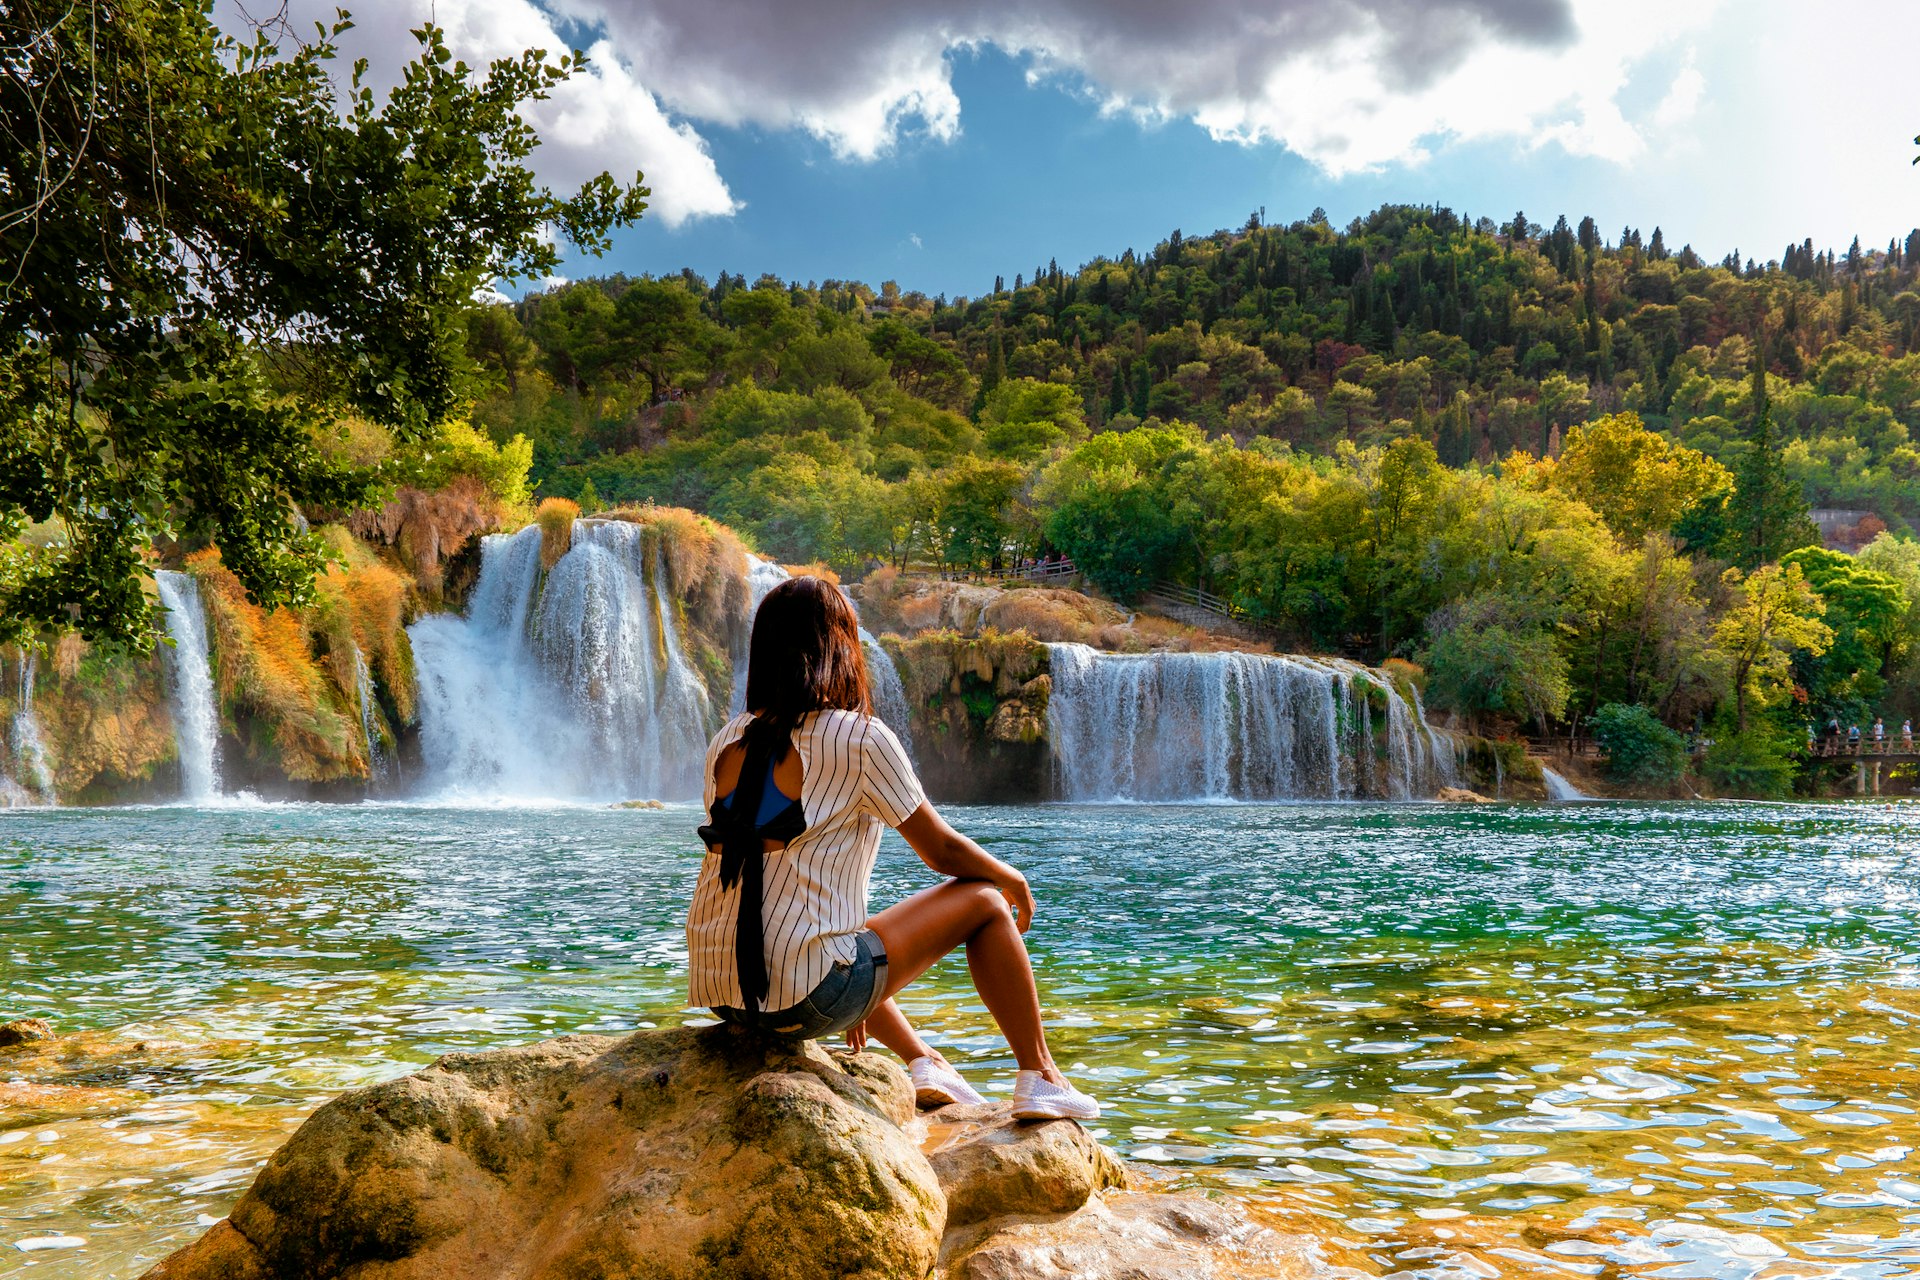 A woman sits on a rock at the edge of a pool being fed by a series of waterfalls in Croatia's Krka national park